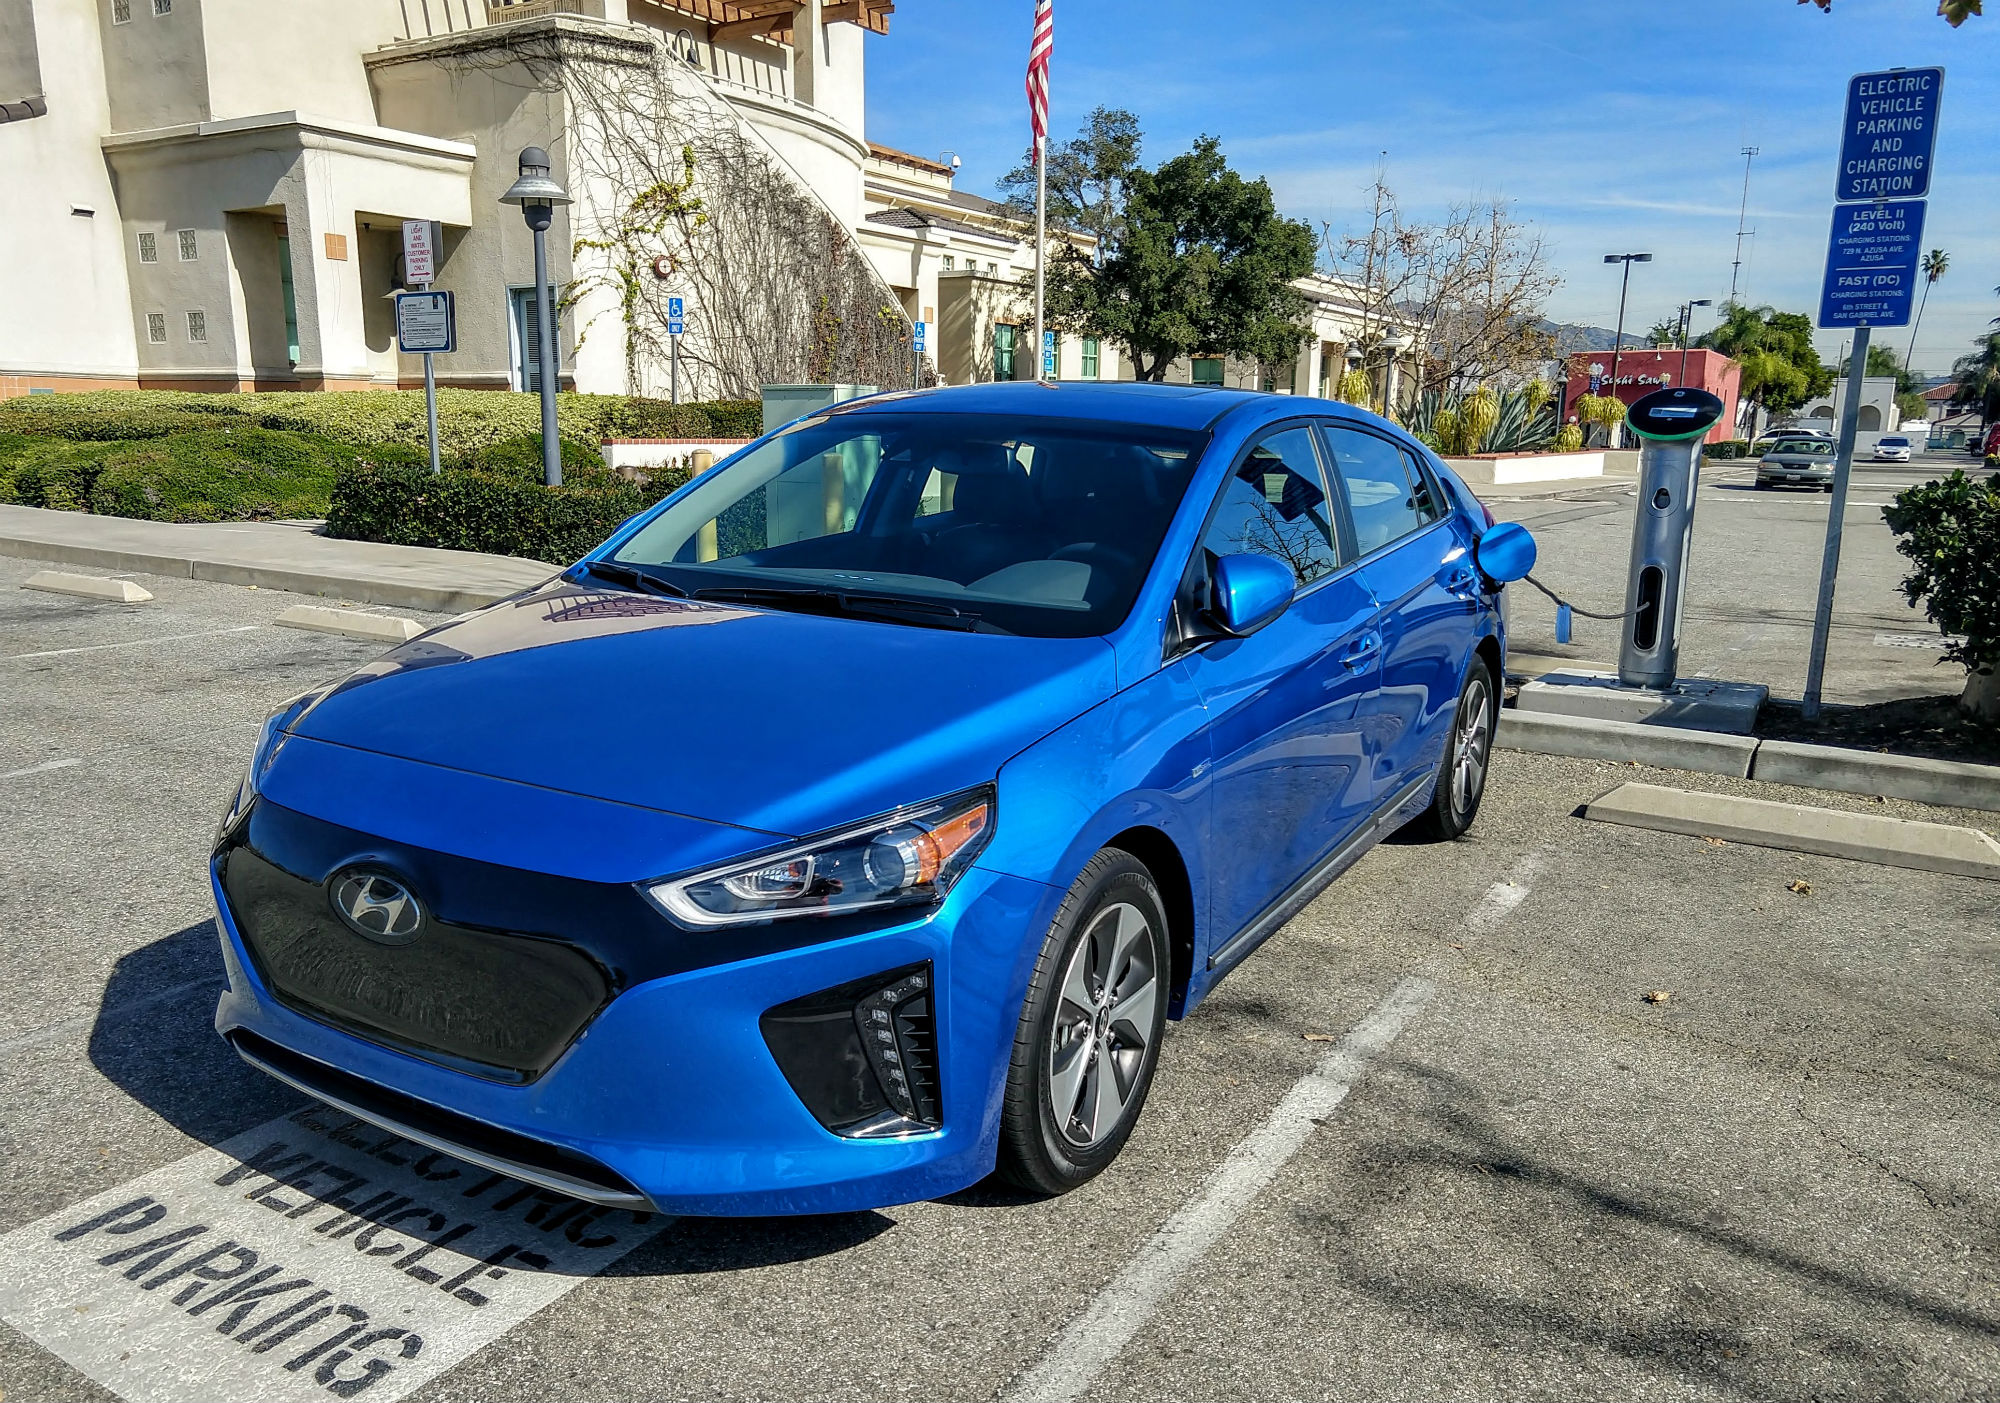 Hyundai Ioniq Electric Review: Going the Distance - TheIgnitionBlog.com